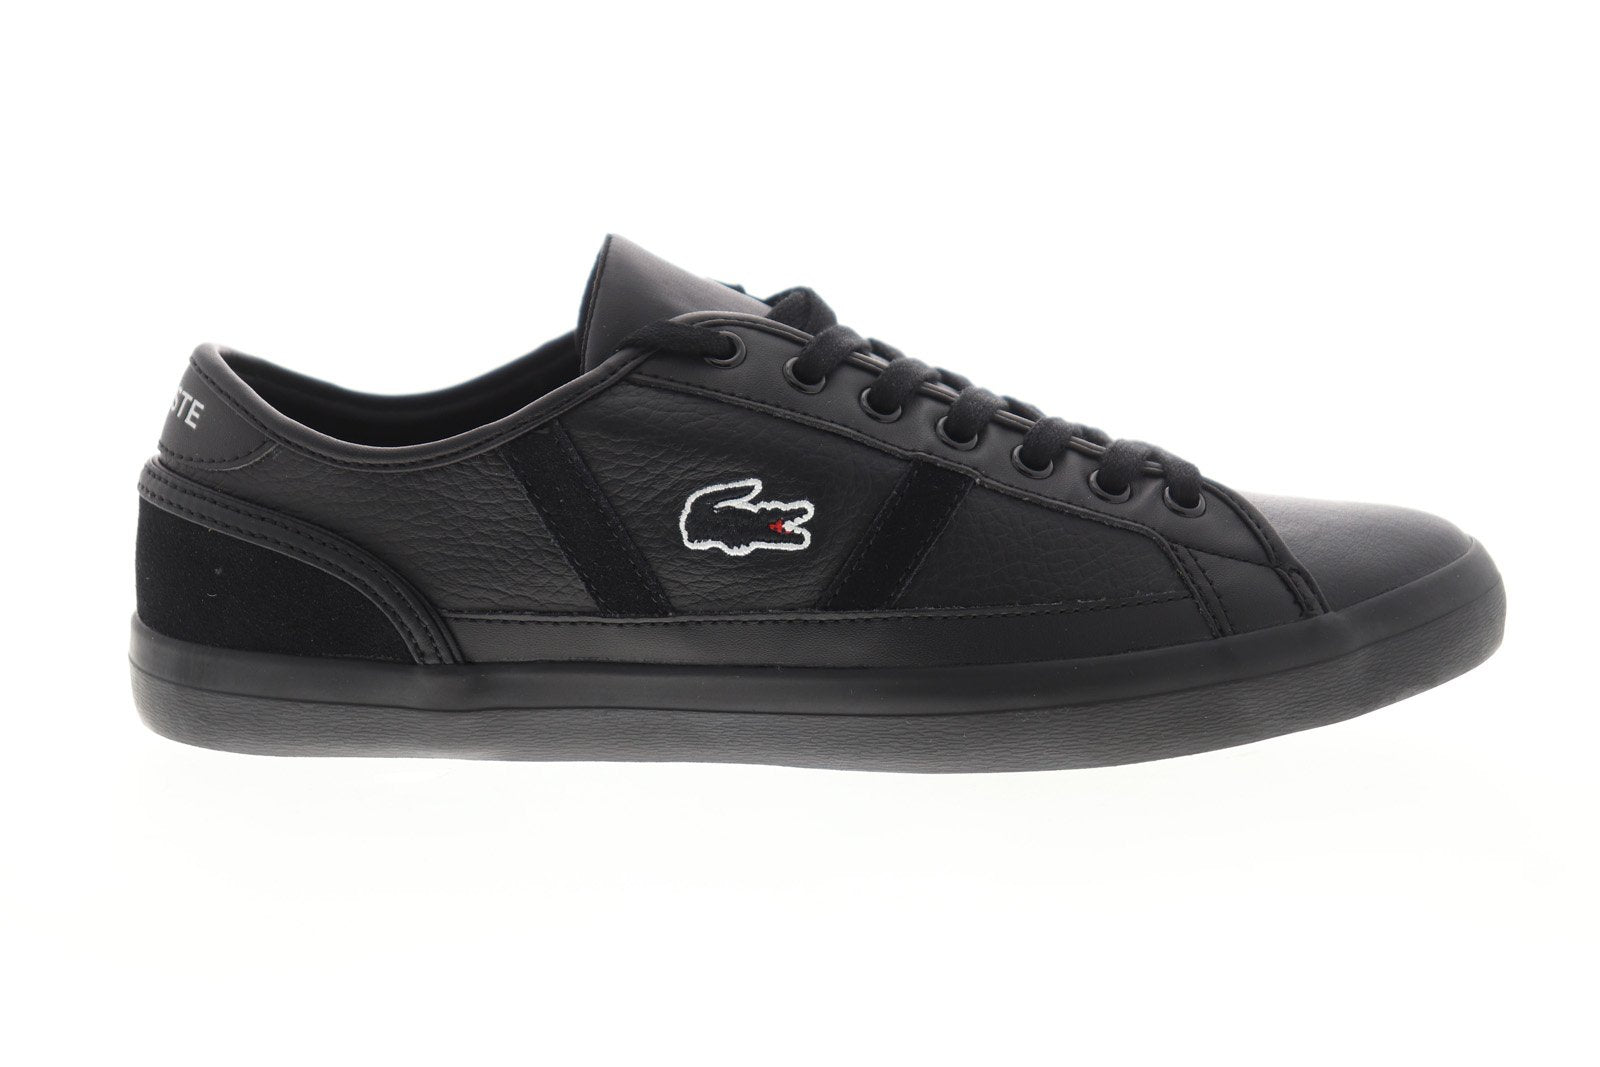 Lacoste Sideline 120 4 CMA Mens Black Leather Lace Up Lifestyle Sneake ...